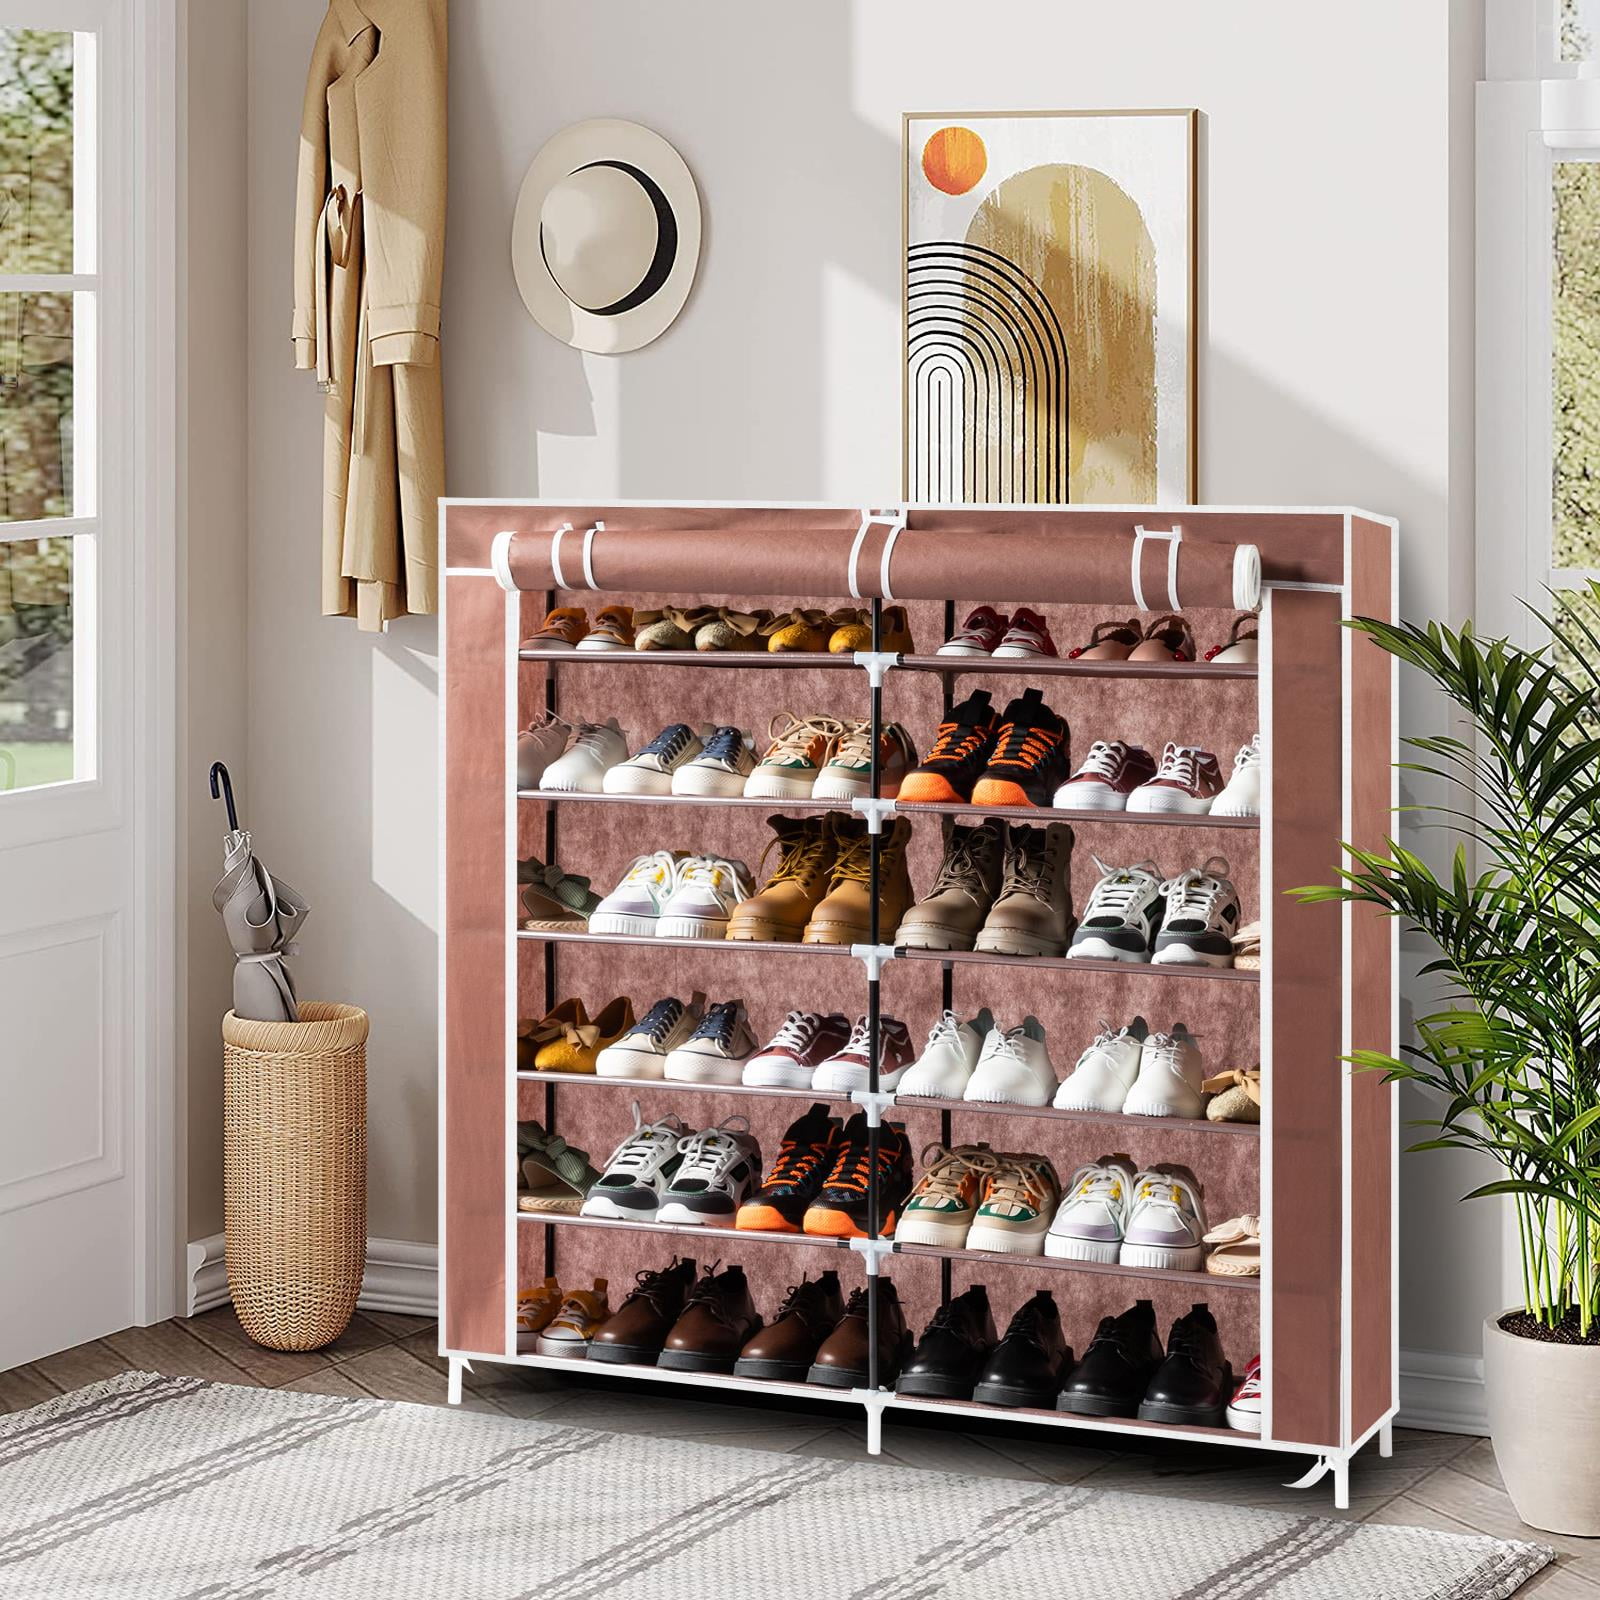 Best shoe racks and organizers, according to professional organizers -  Curbed